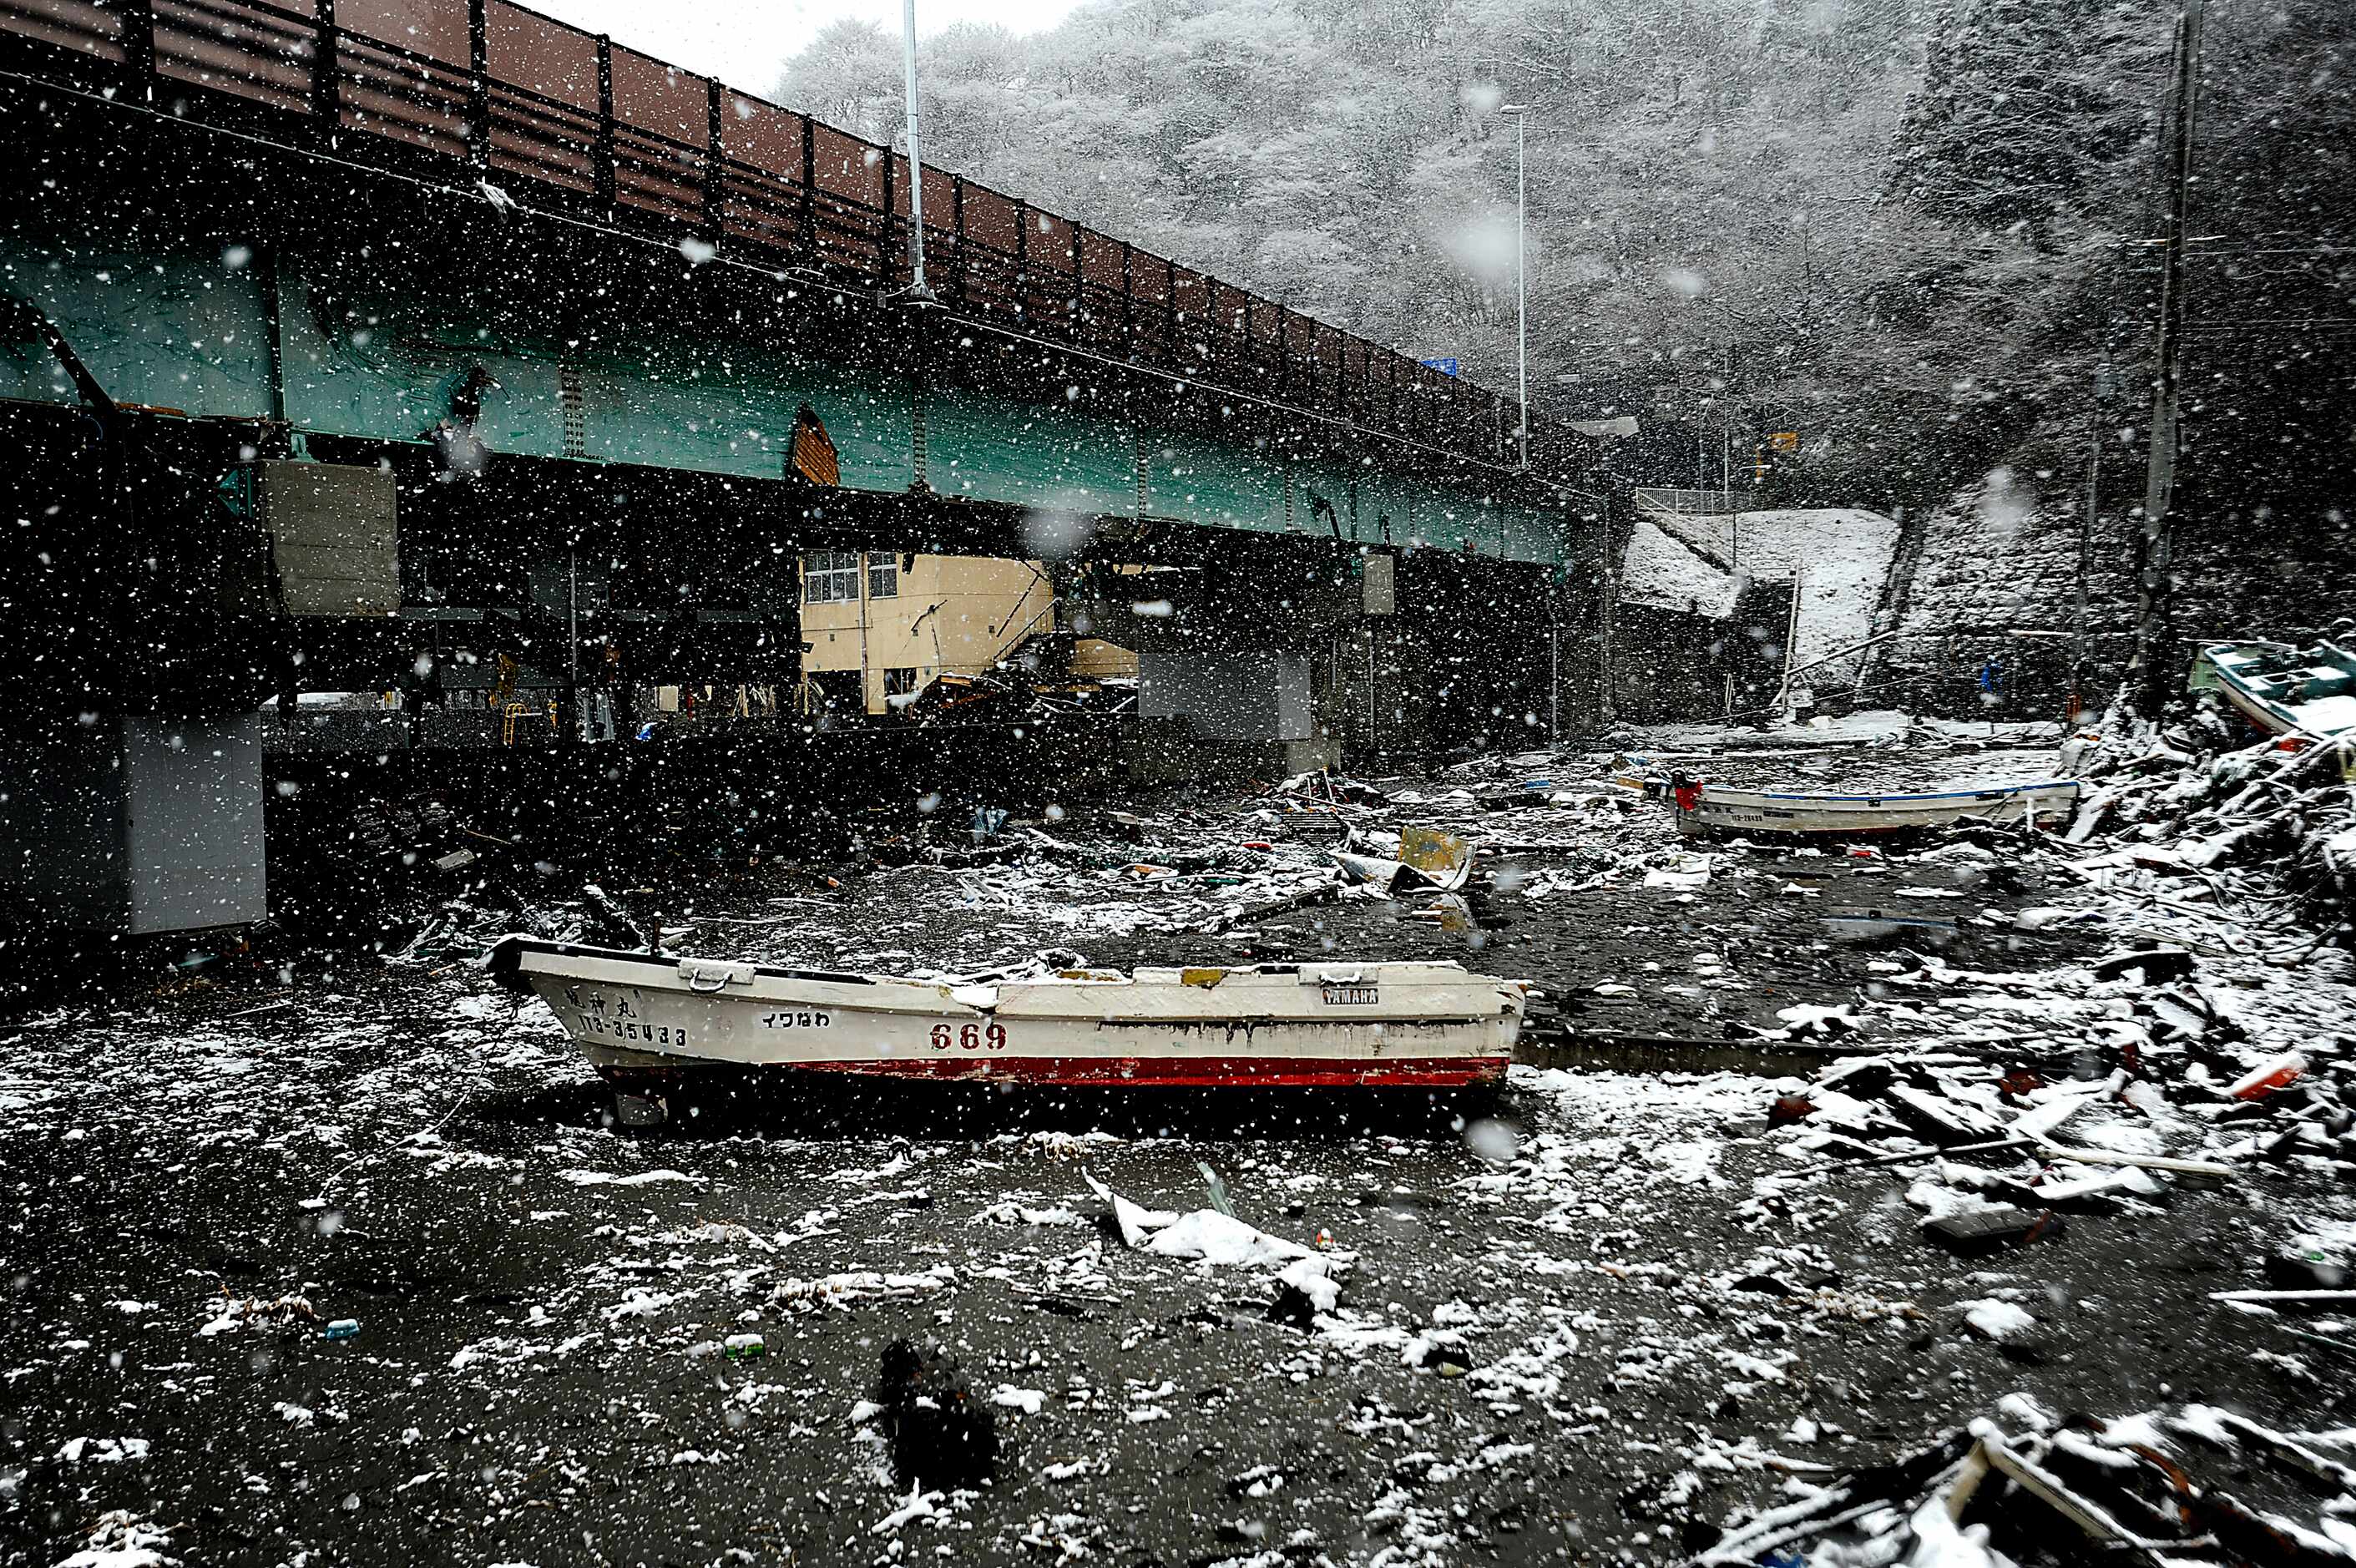 Debris and wreckage is piled up on March 16, 2011 in Kamaishi, Japan after a 9.0 Earthquake...